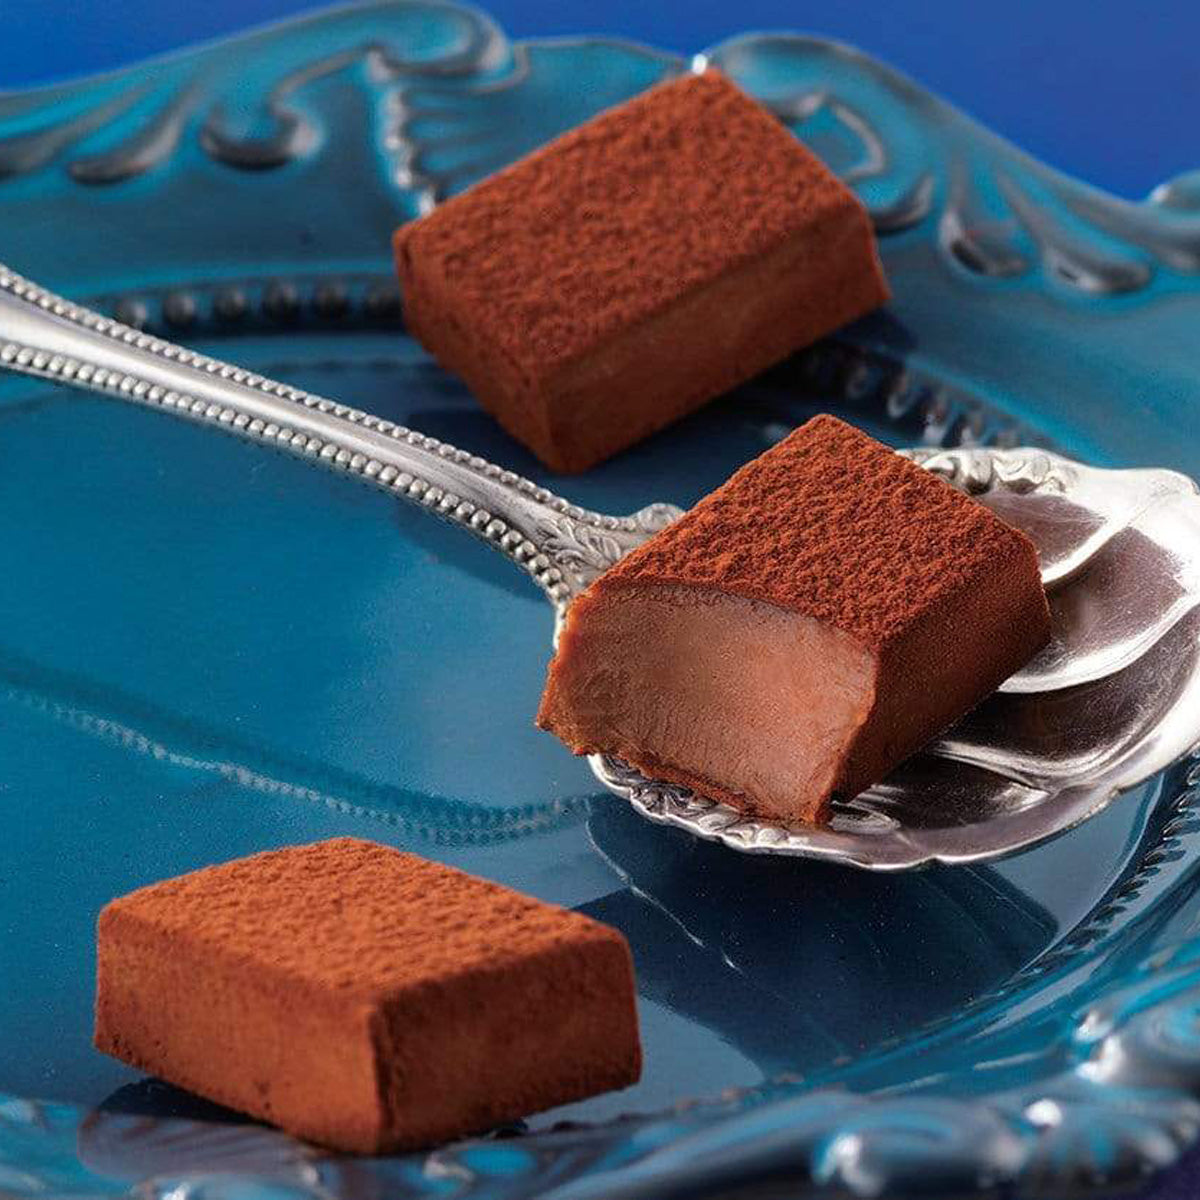 ROYCE' Chocolate - Nama Chocolate "Au Lait" - Image shows brown blocks of chocolate on a xanh rớt plate with a silver spoon.